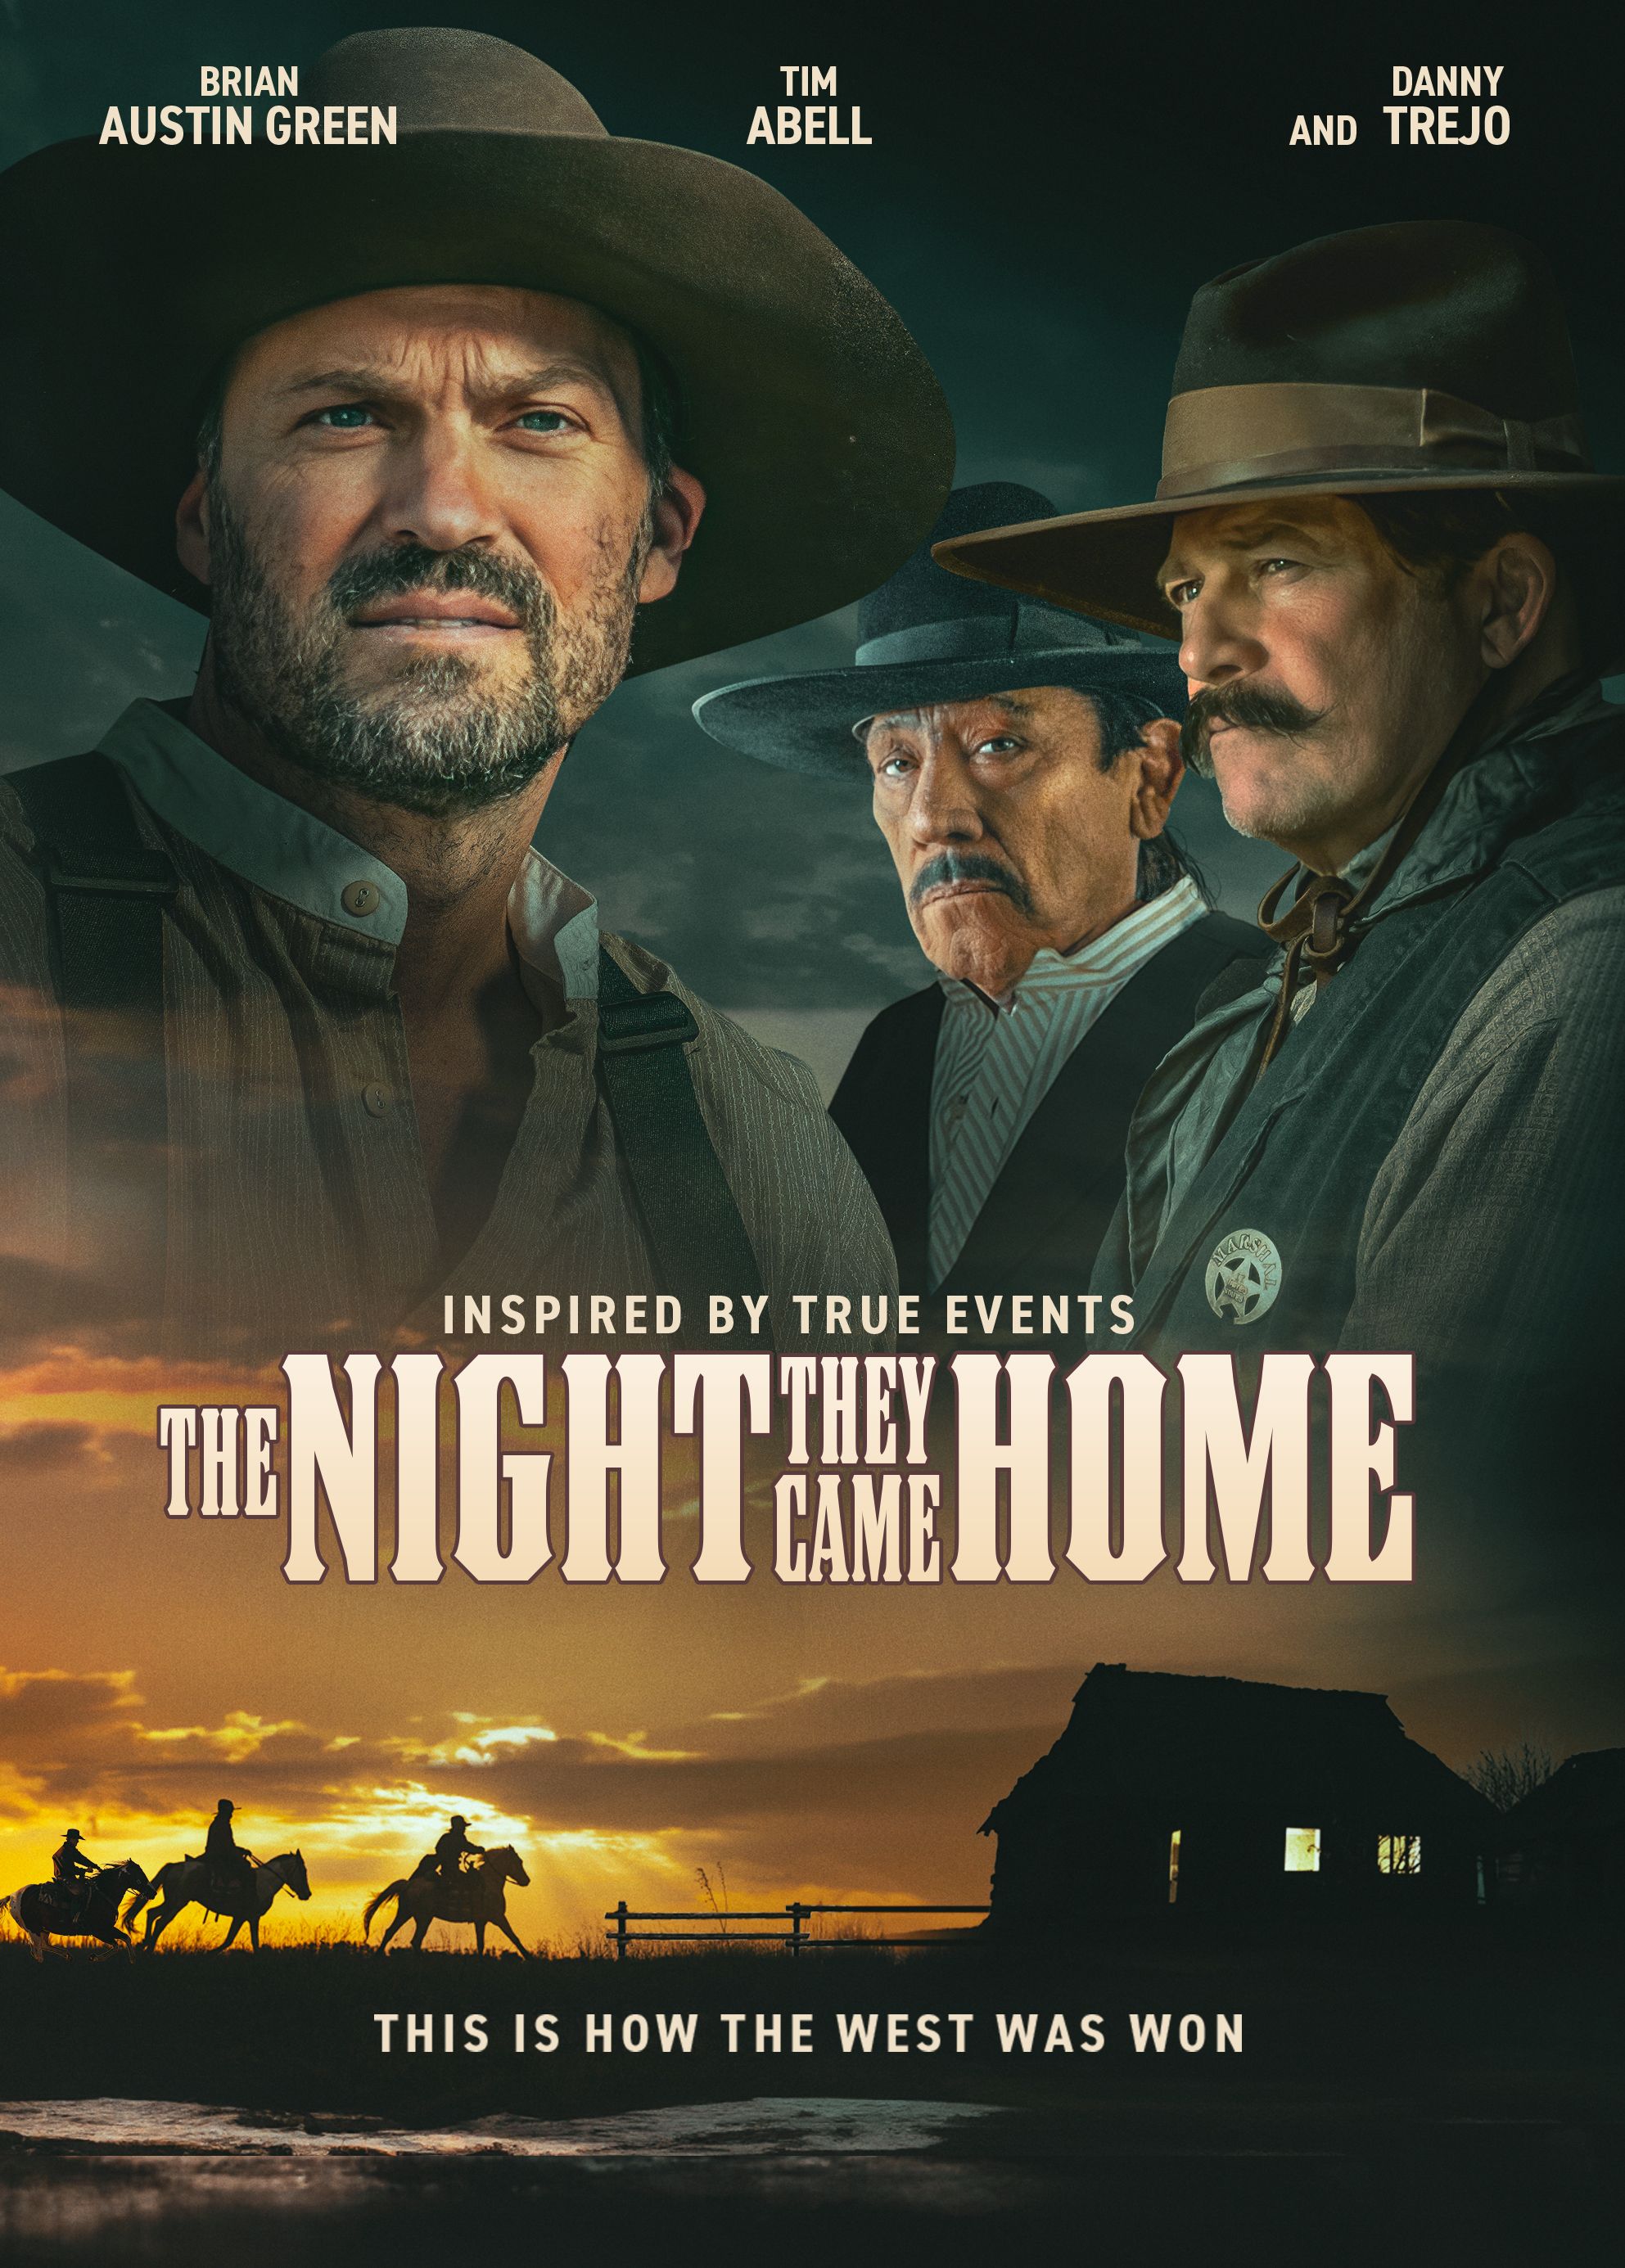 The Night They Came Home Trailer: Danny Trejo Recounts The Tale Of The Rufus Buck Gang In Western Thriller [EXCLUSIVE]